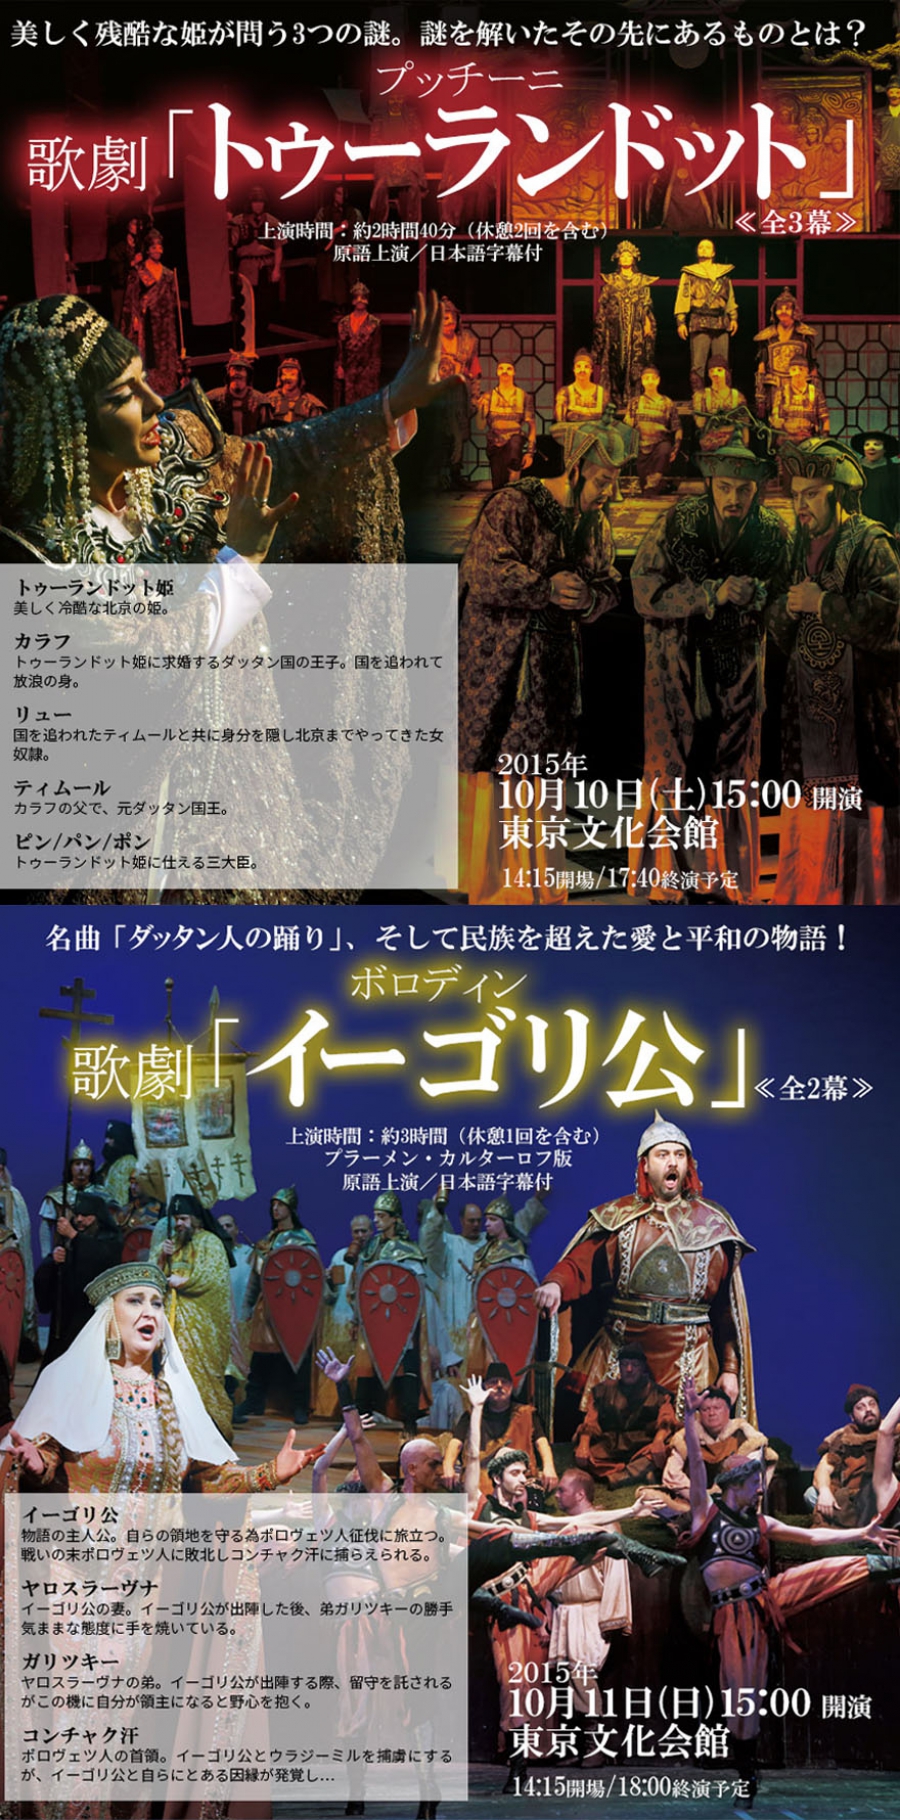 “Prince Igor” and “Turandot” will be performed this autumn in the Land of the Rising Sun